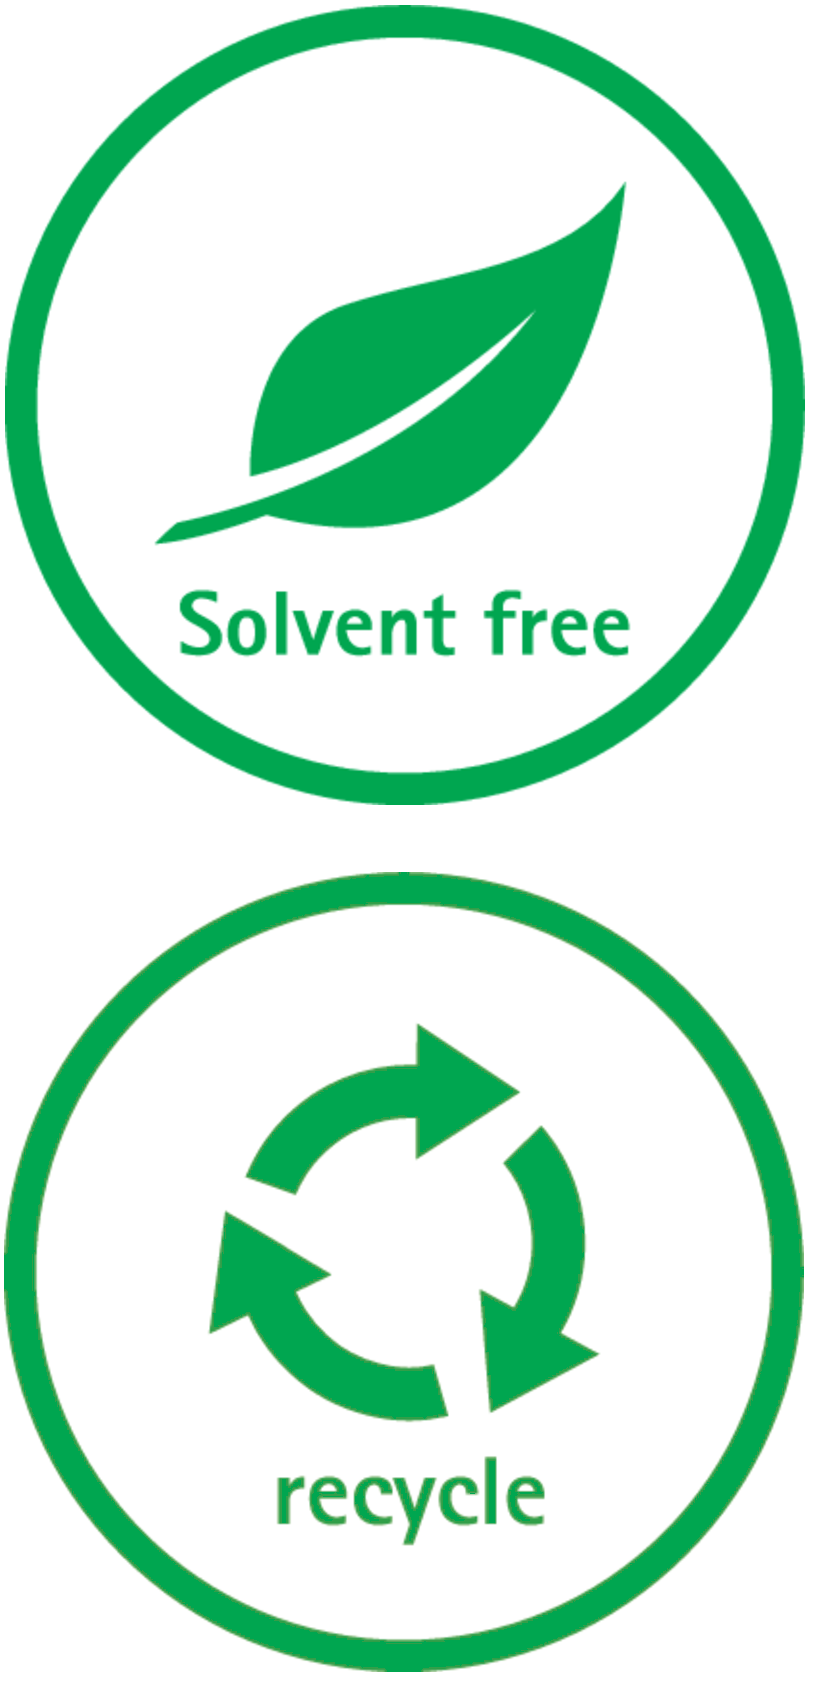 SolventFree_Recycle.png